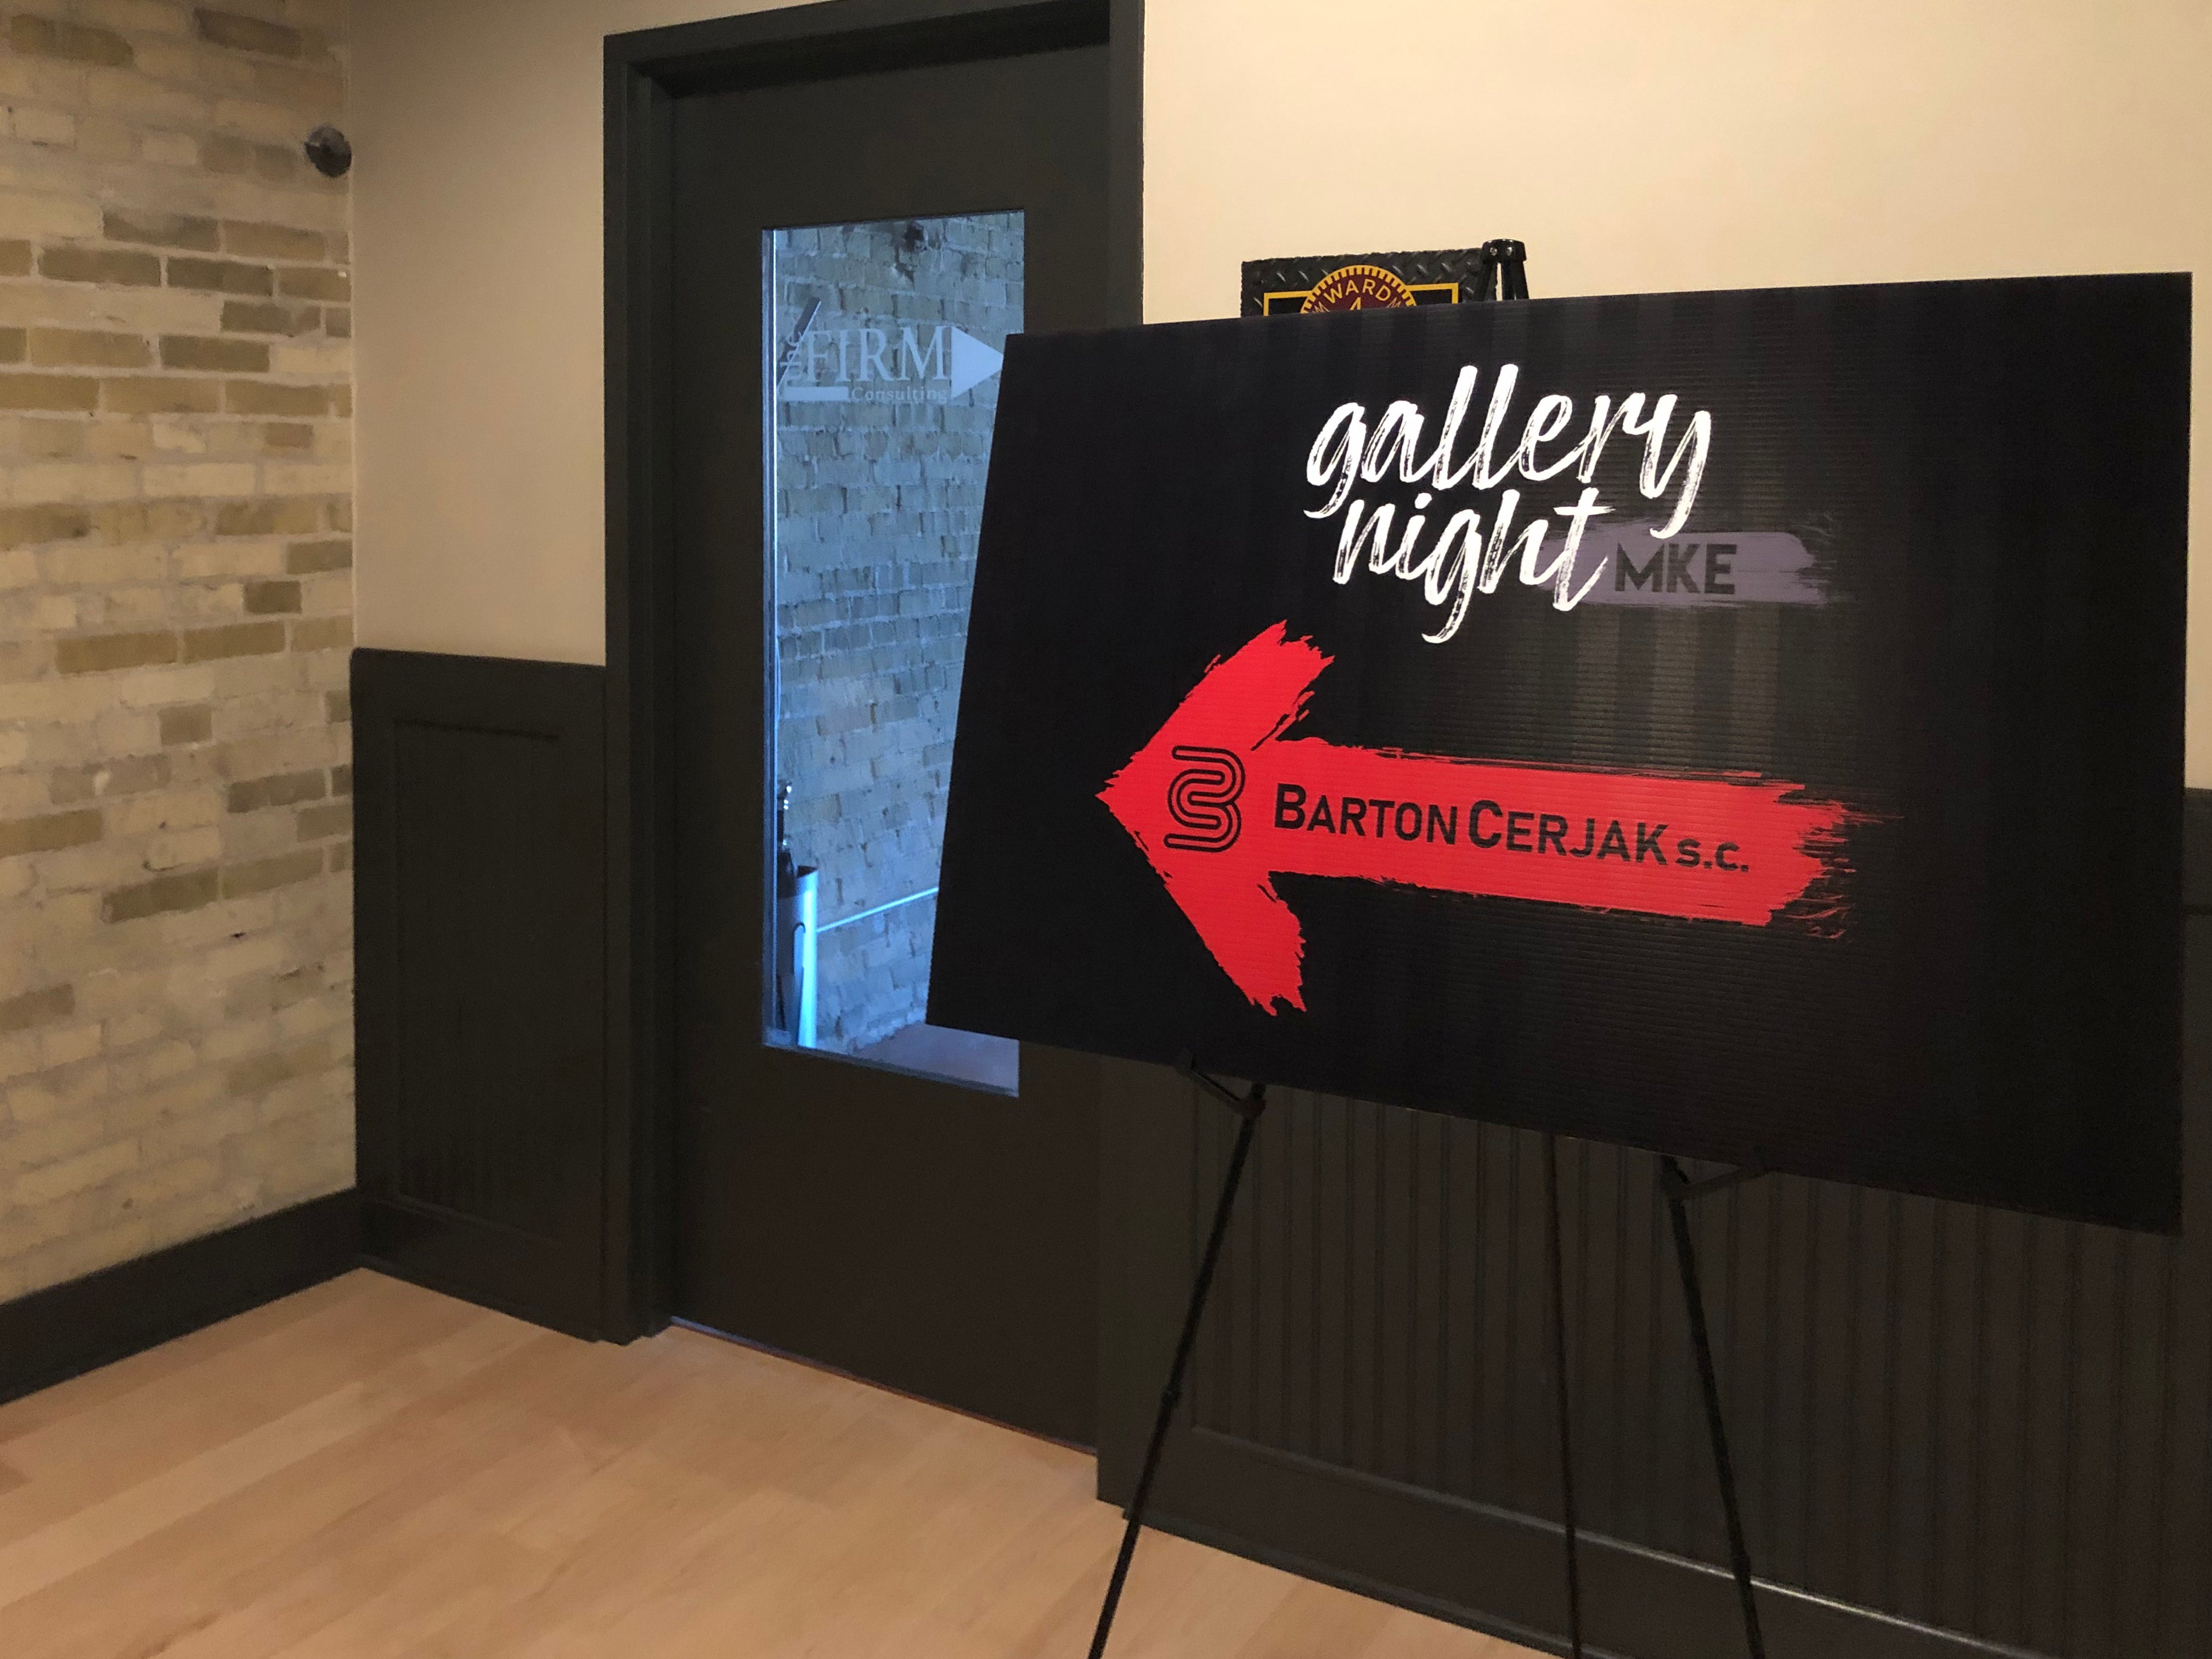 Gallery Night signage inside the historic Pritzlaff Building in Milwaukee